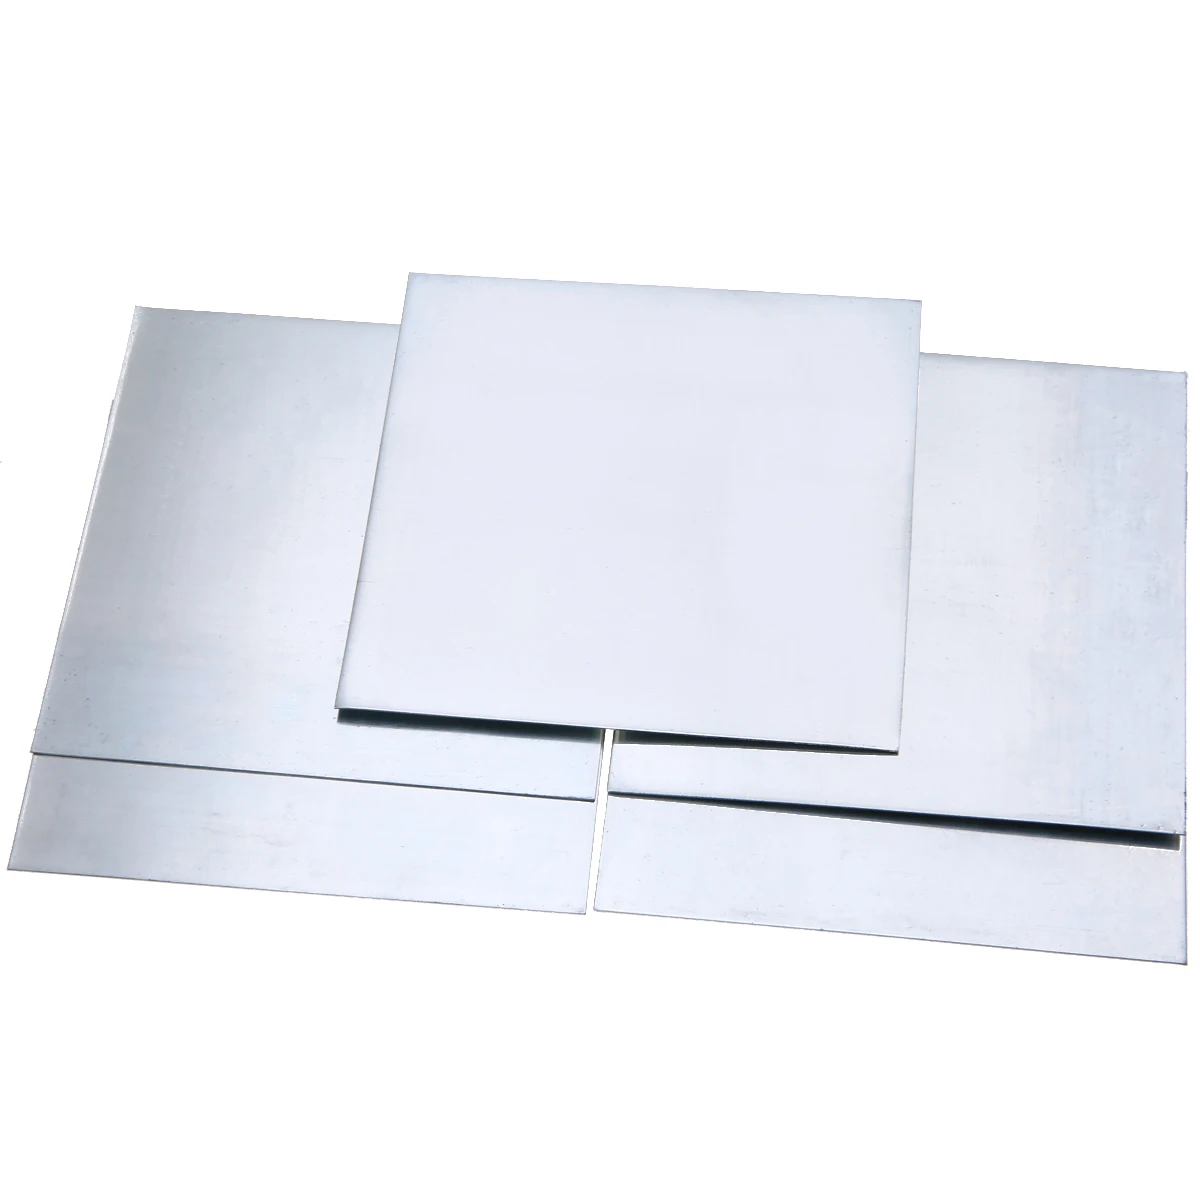 

5pcs High-purity Pure Zinc Zn Sheet Plate 0.5mm Thickness Metal Foil 100mmx100mm For Power Tools DIY lab material wholesale